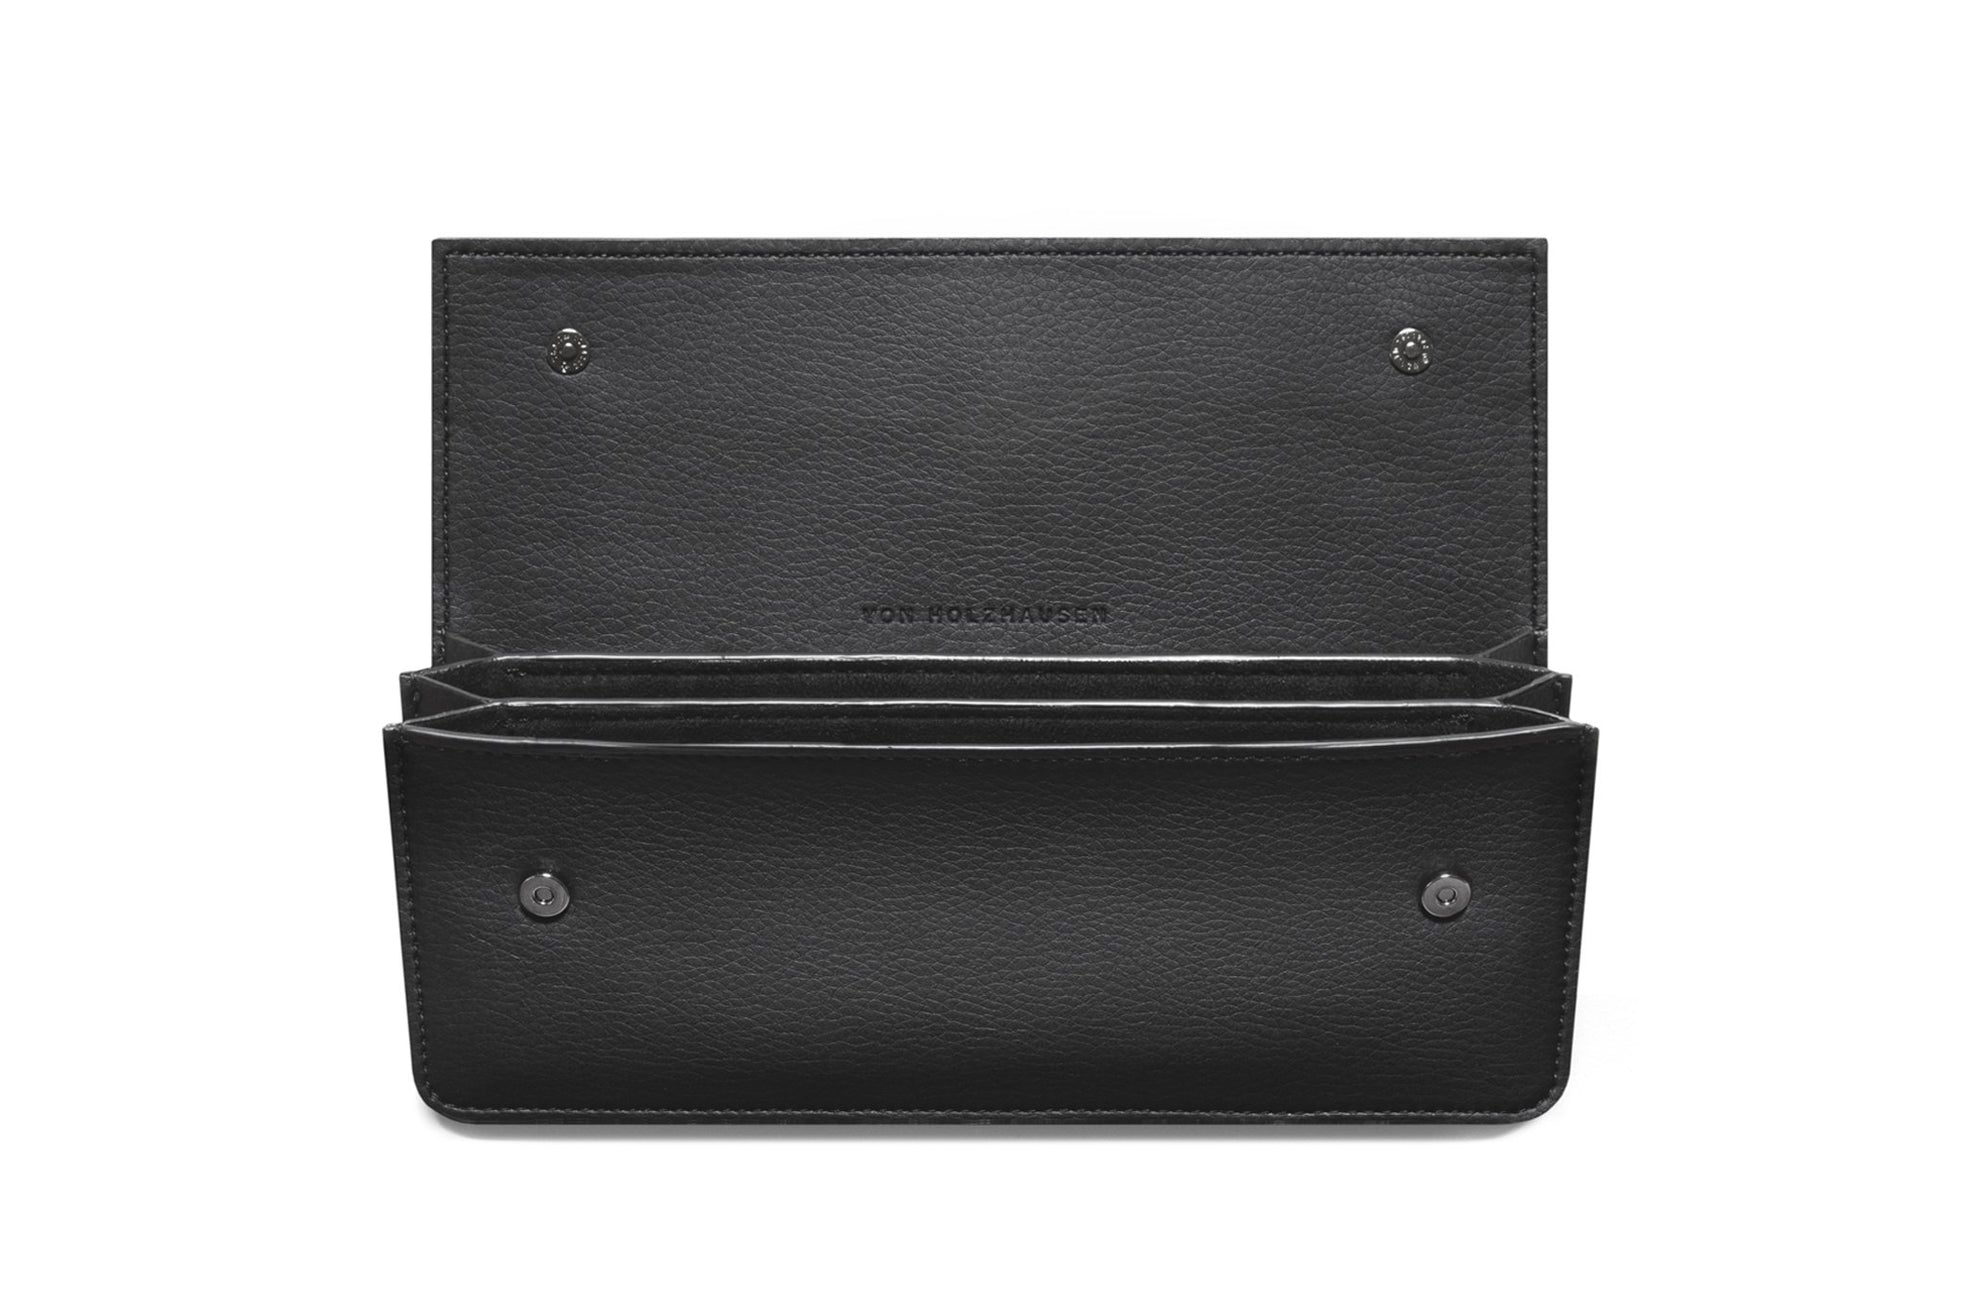 The Accordion Pouch - Sample Sale in Technik in Black image 7